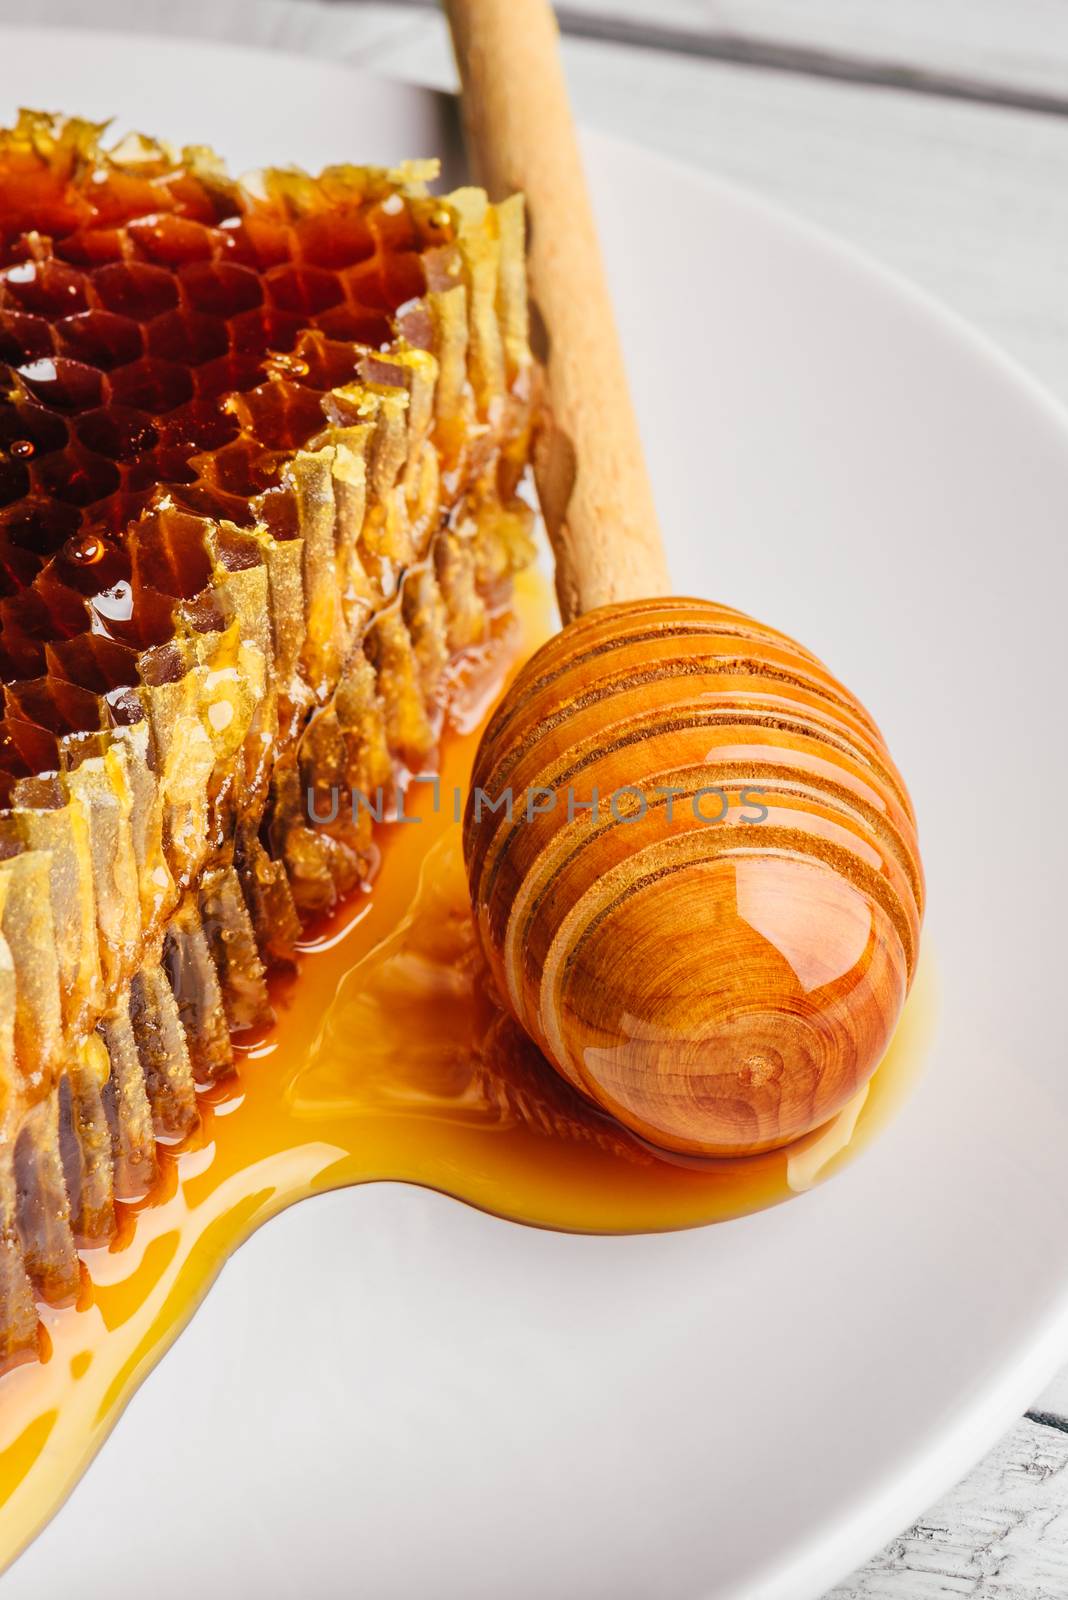 Delicious honeycomb on white plate with wooden honey dipper